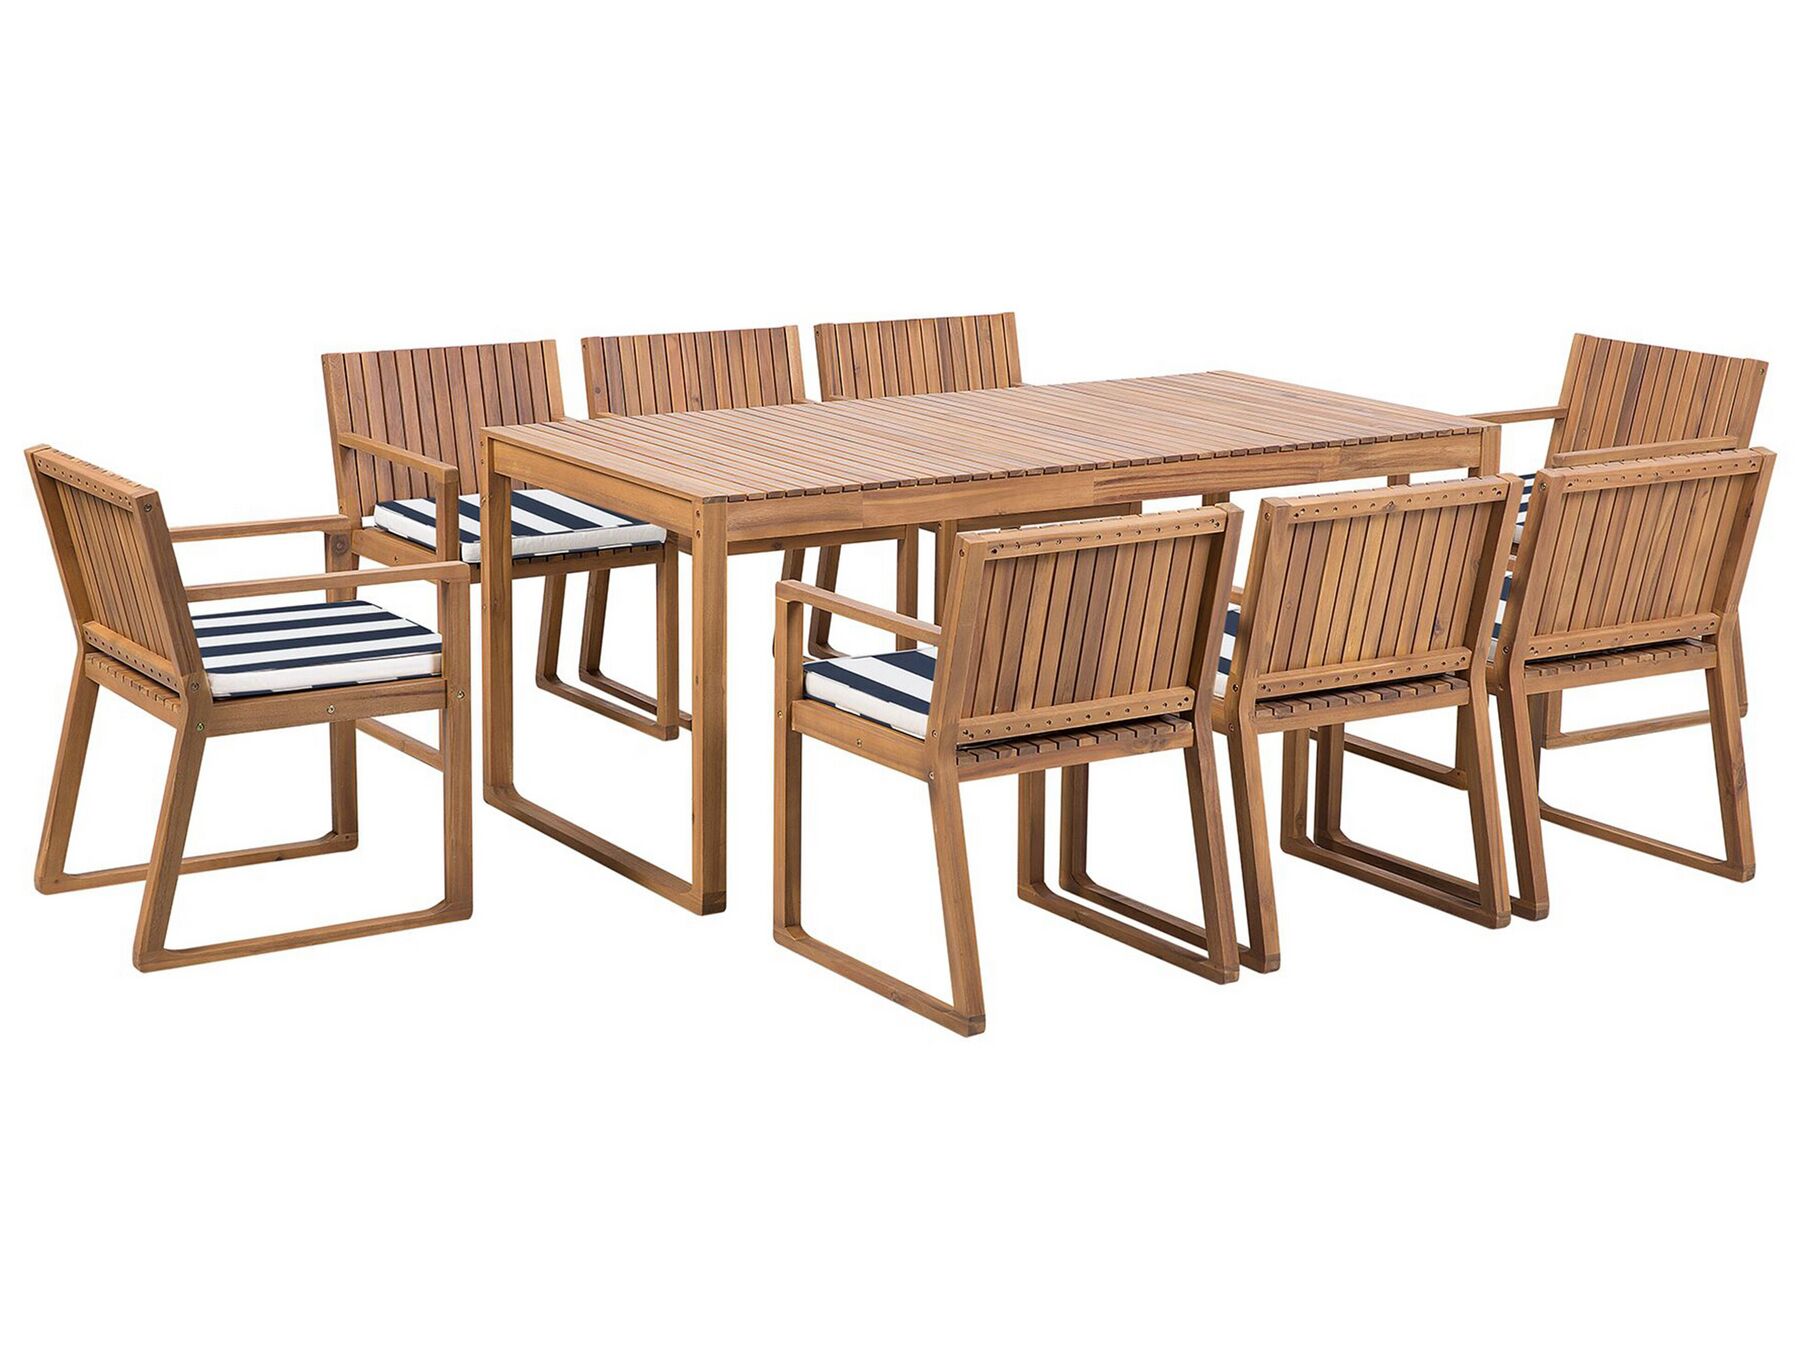 8 Seater Acacia Wood Garden Dining Set with Navy Blue and White Cushions SASSARI_774922